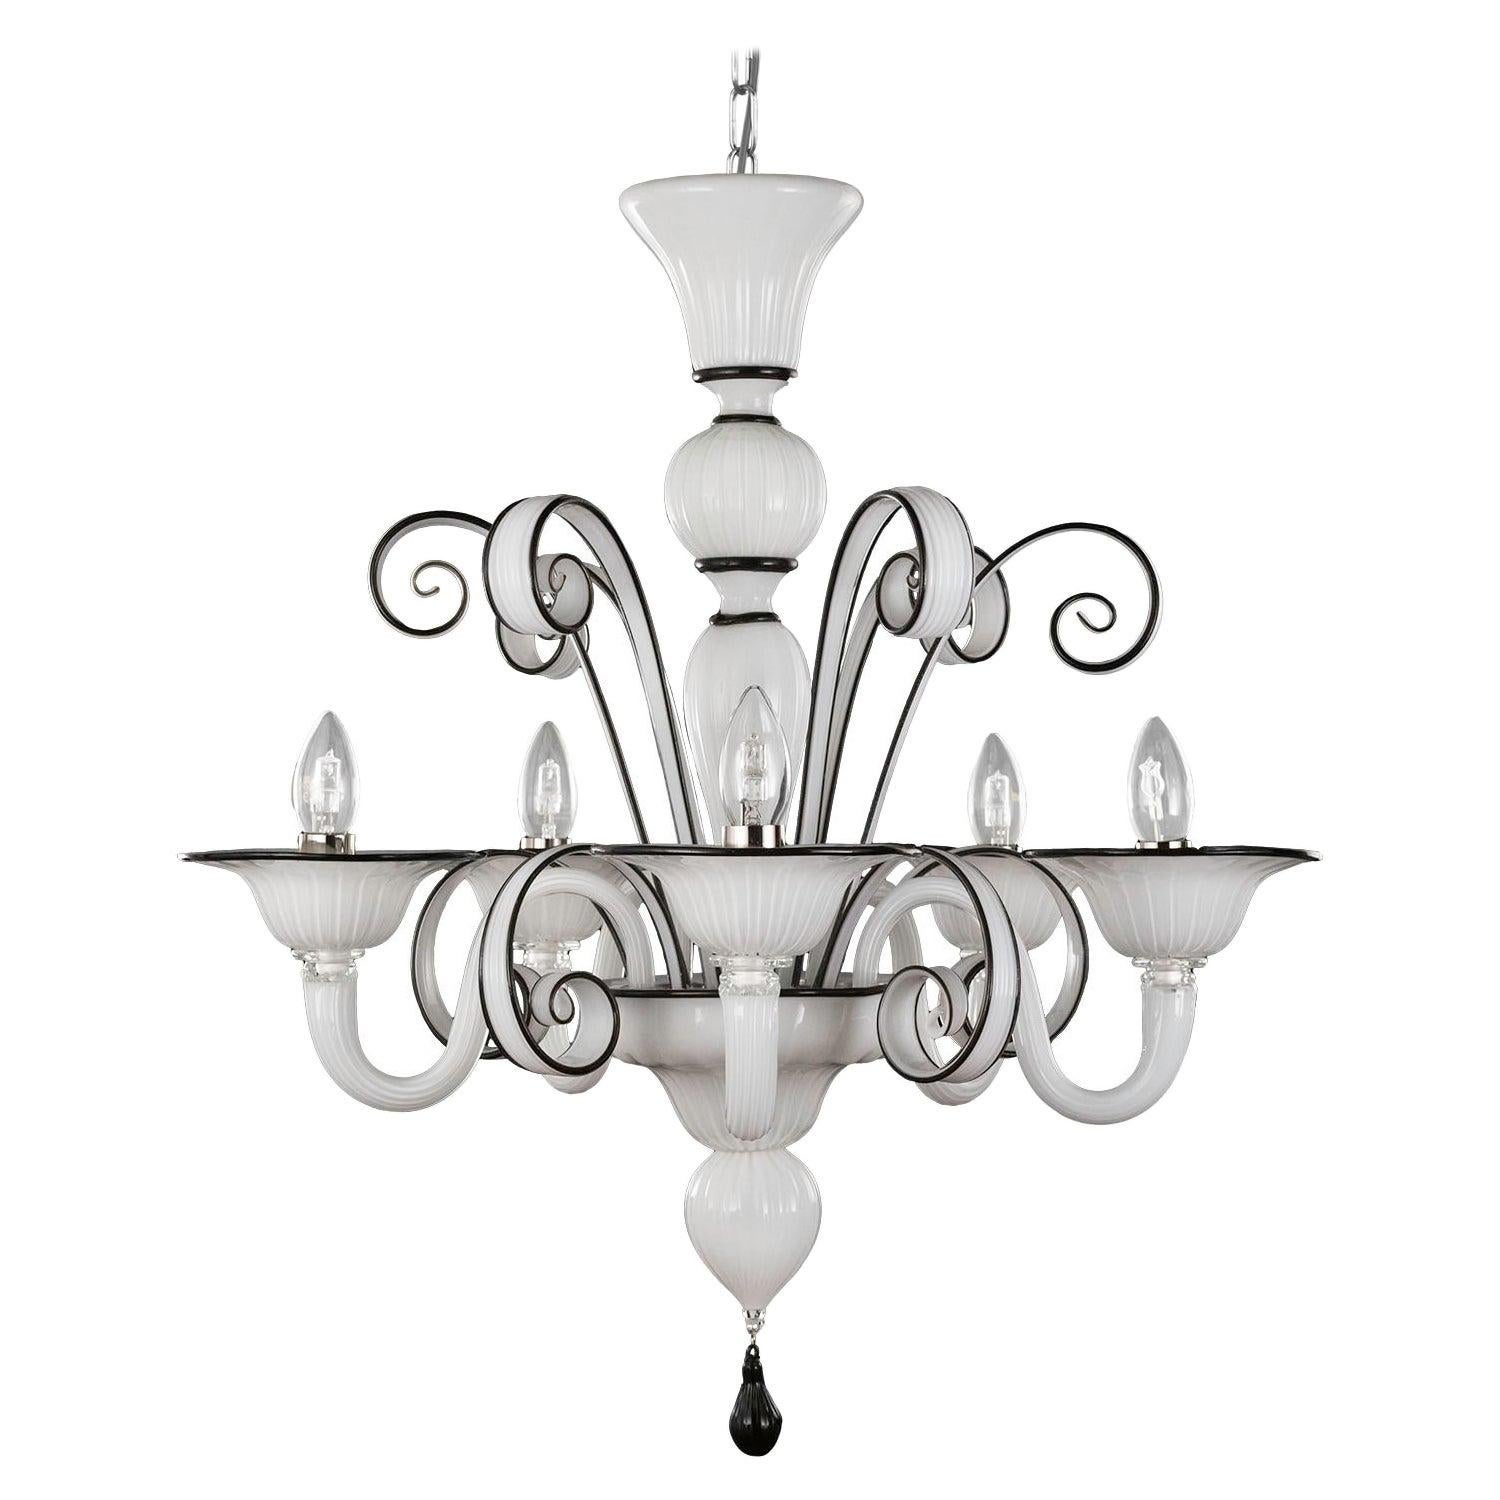 Chandelier 5 Arms White Blown Artistic Murano Glass, Black Details by Multiforme